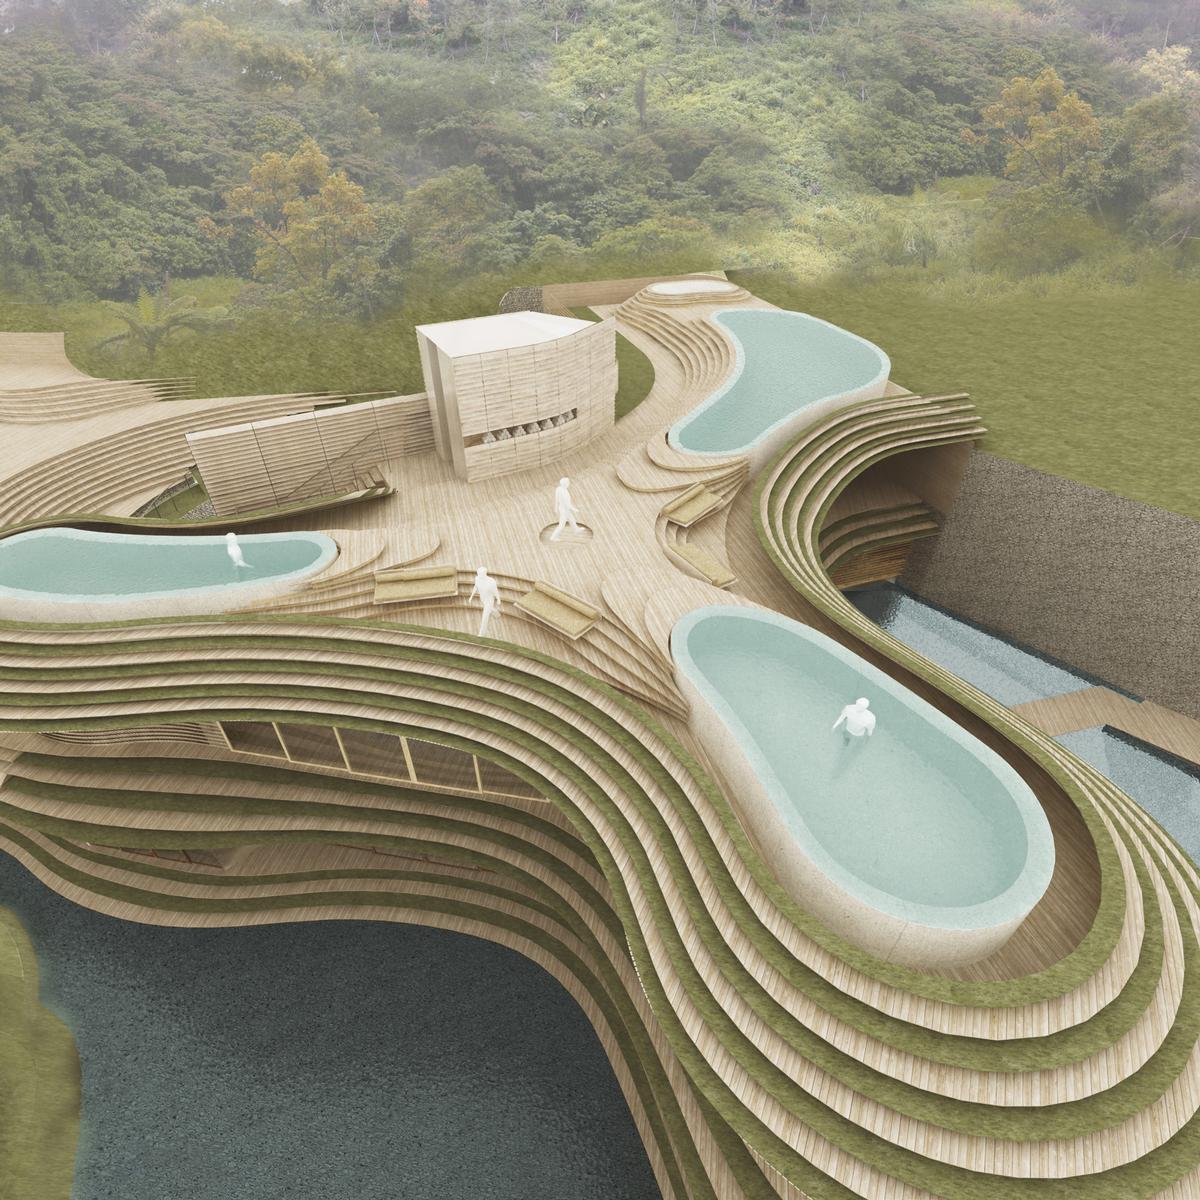 The resort’s landform architecture merges with the natural surroundings and inspires its curvaceous appearance